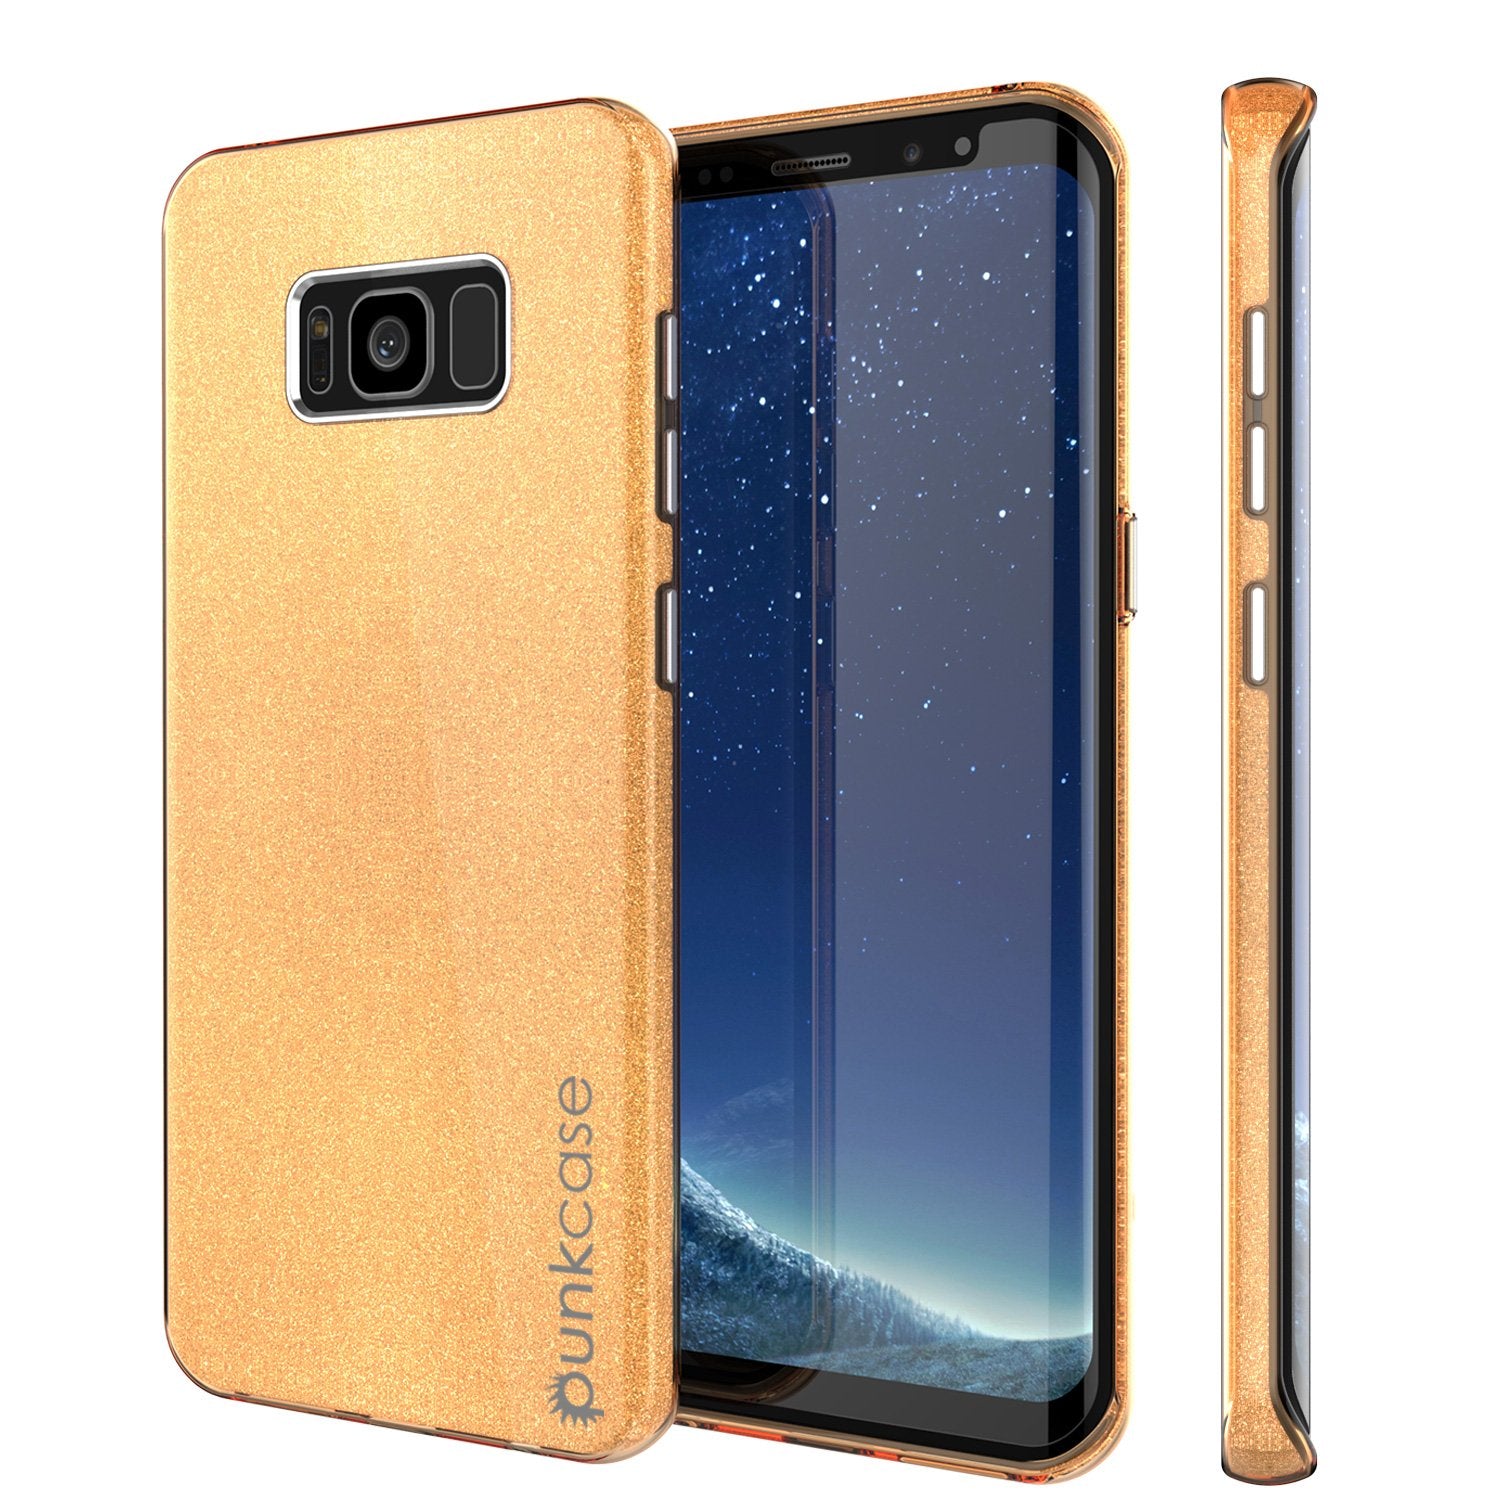 Galaxy S8 Plus Case, Punkcase Galactic 2.0 Series Ultra Slim Protective Armor TPU Cover [Gold] - PunkCase NZ